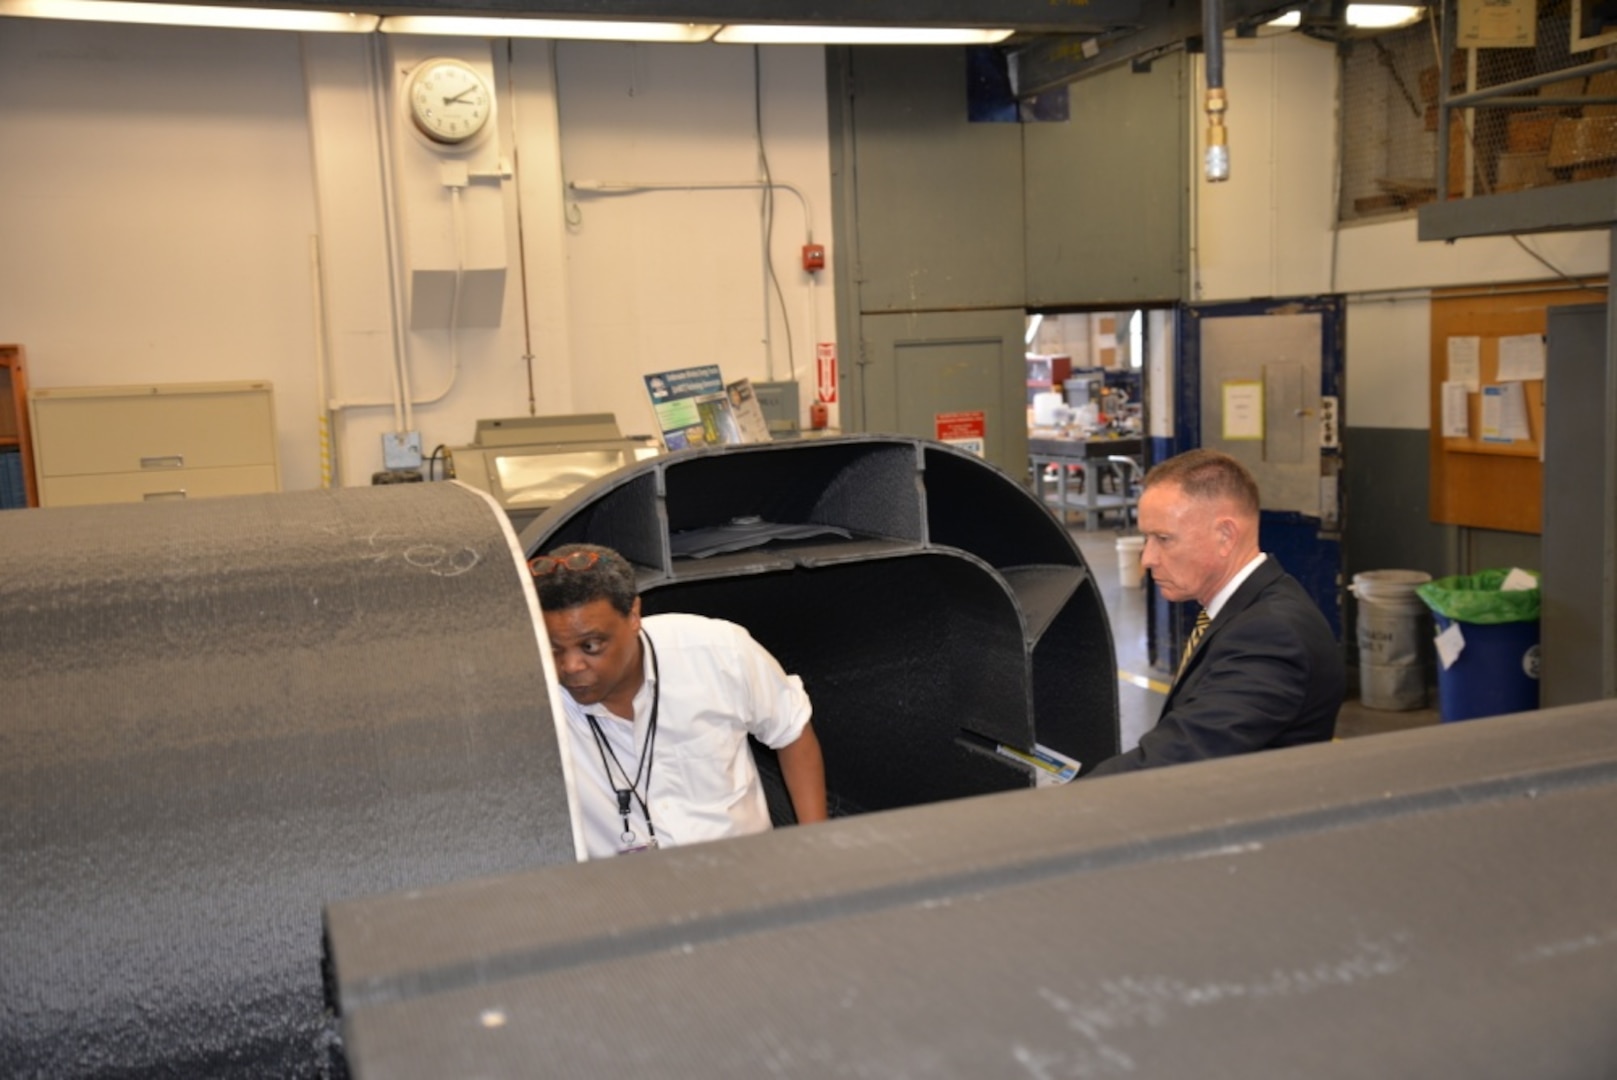 Deputy Assistant Secretary of the Navy for Unmanned Systems Frank Kelley (right) listens to Garry Shields, director of the Disruptive Technologies Lab, on April 20, 2018, as Shields explains the second version of the Optionally Manned Technology Demonstrator that is being readied for hydrodynamic testing at Naval Surface Warfare Center, Carderock Division in West Bethesda, Md. (U.S. Navy photo by Kelley Stirling/Released)